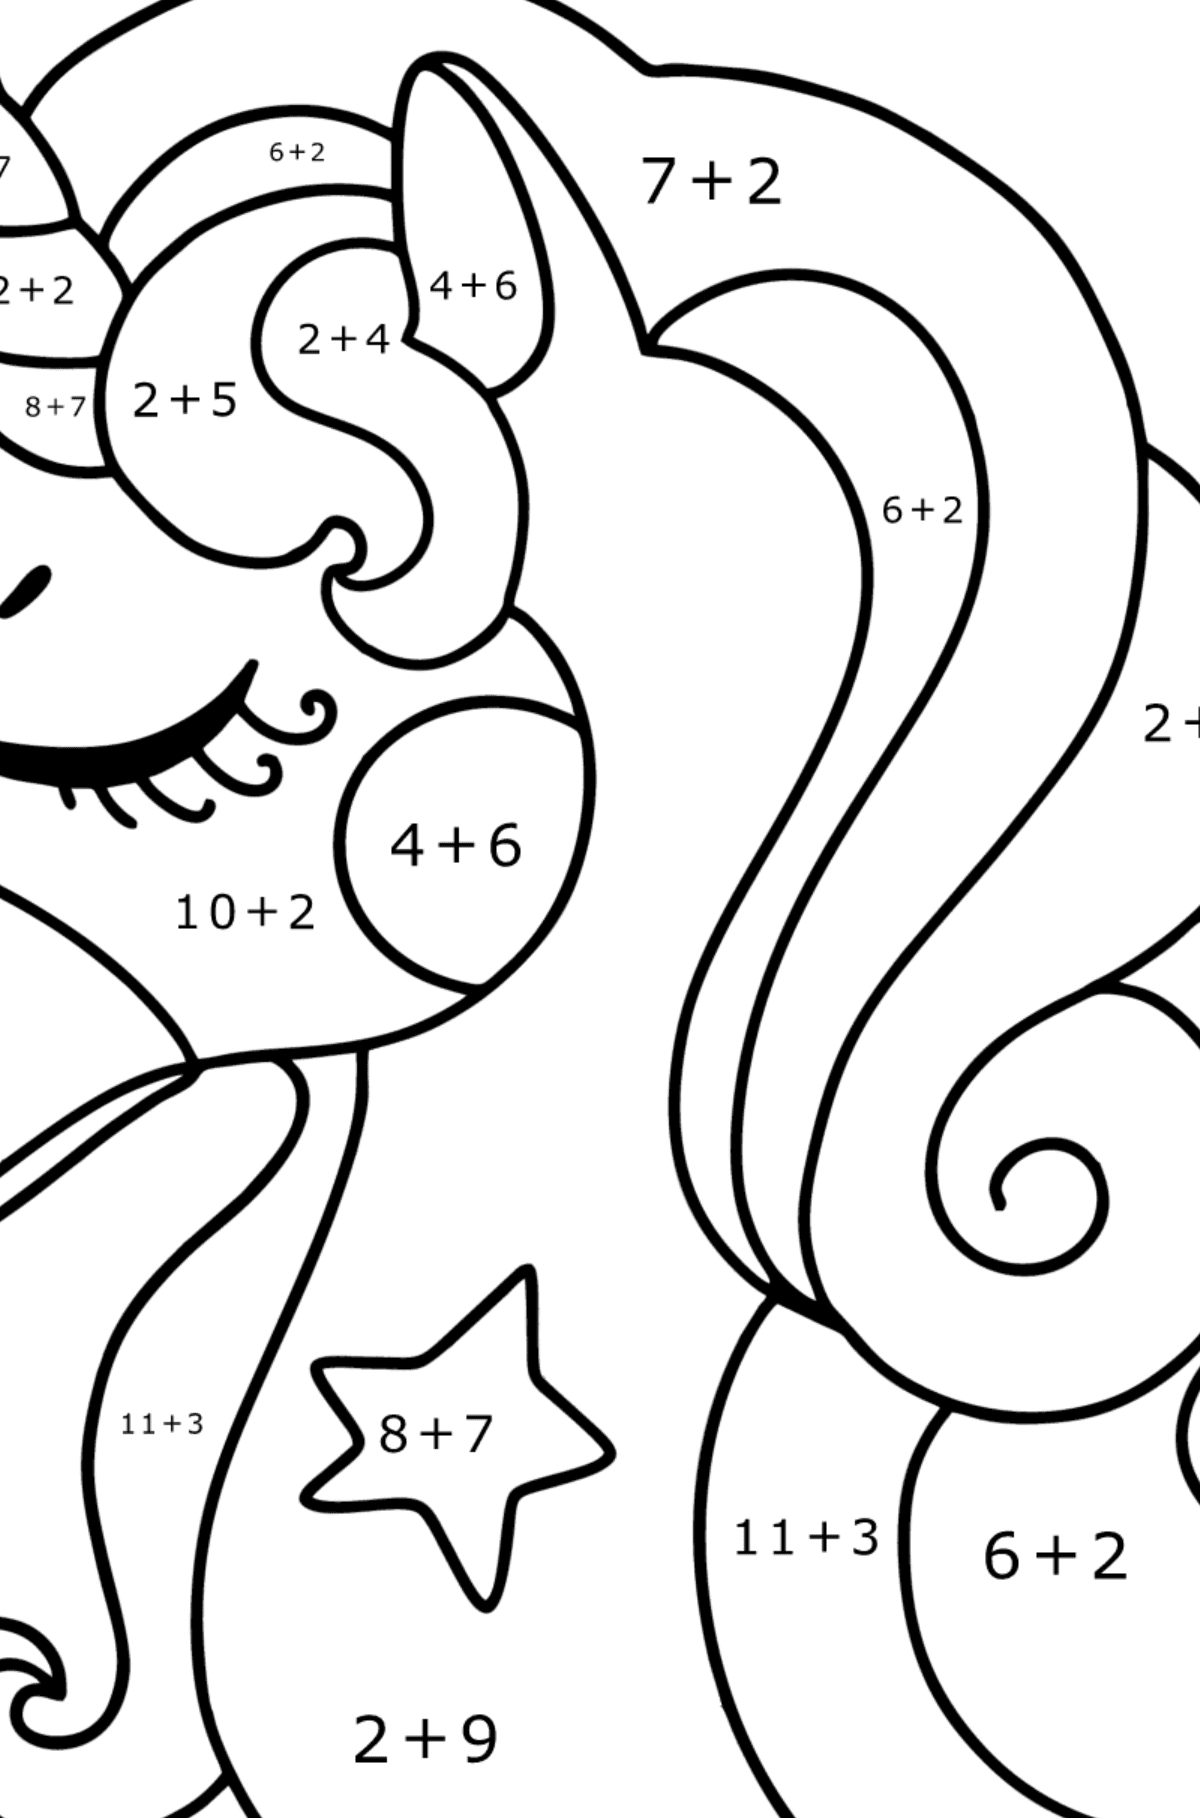 Unicorn head coloring page - Math Coloring - Addition for Kids